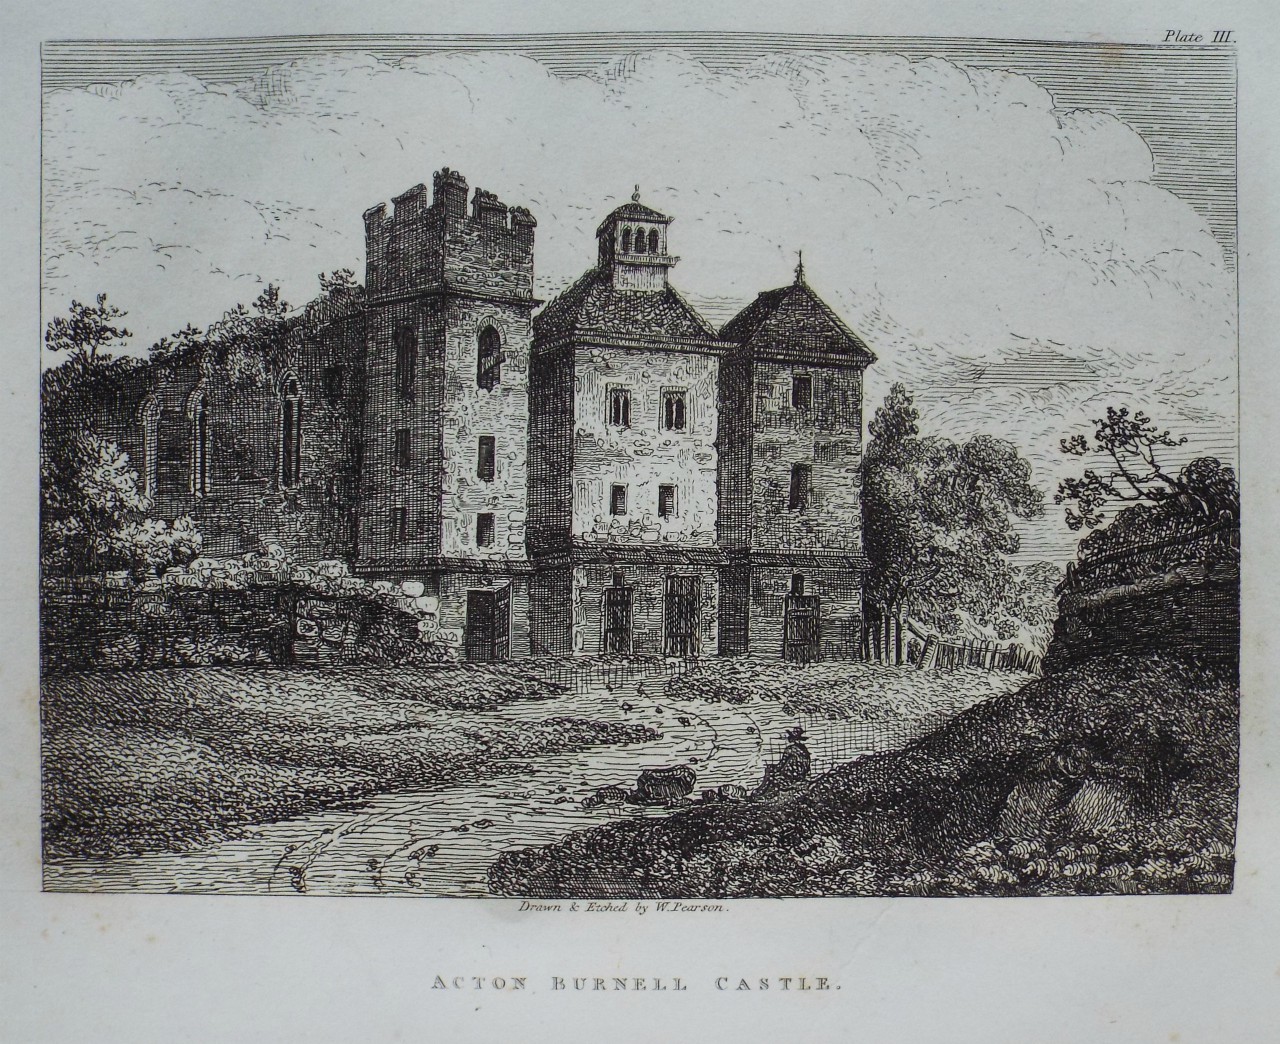 Etching - Acton Burnell Castle. - Pearson